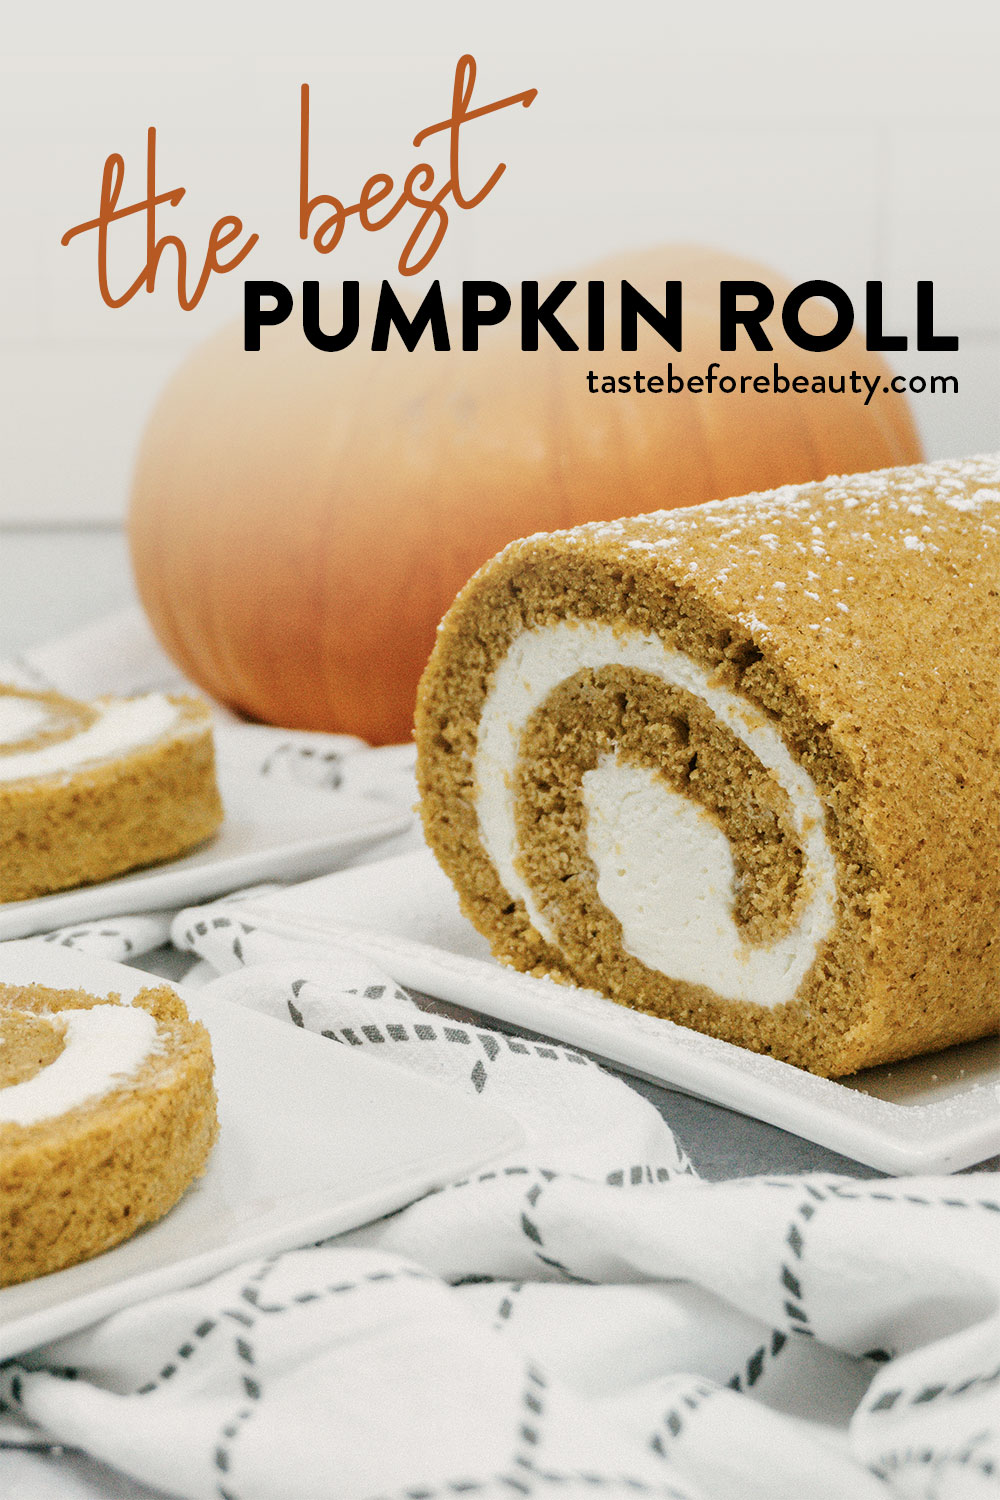 taste before beauty pumpkin roll with cream cheese frosting cut open with slices